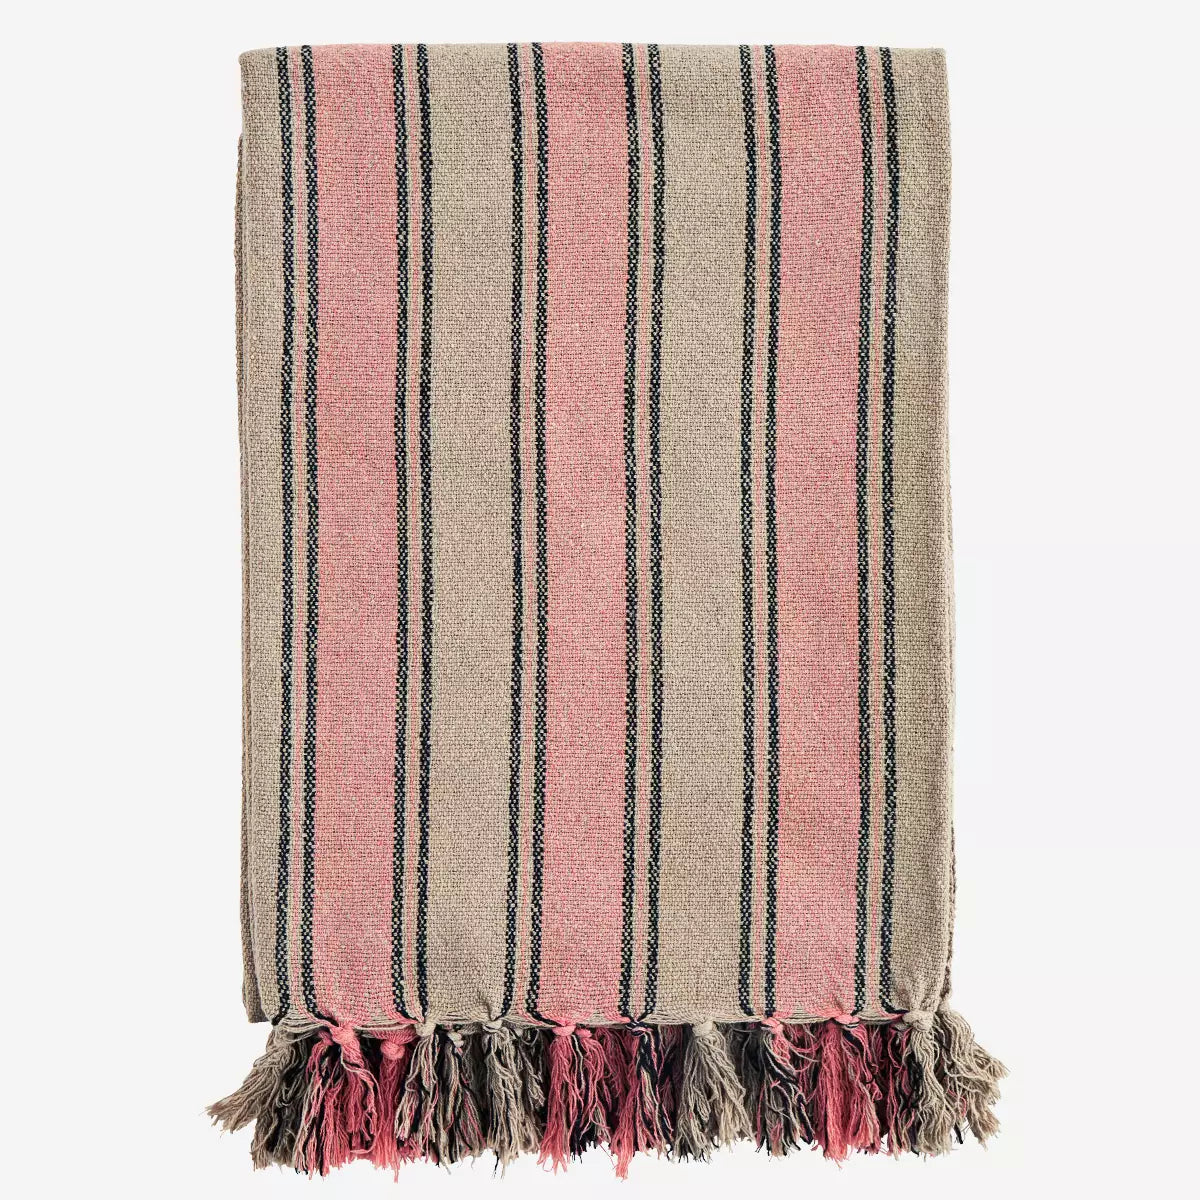 Coral & Taupe Woven Cotton Throw